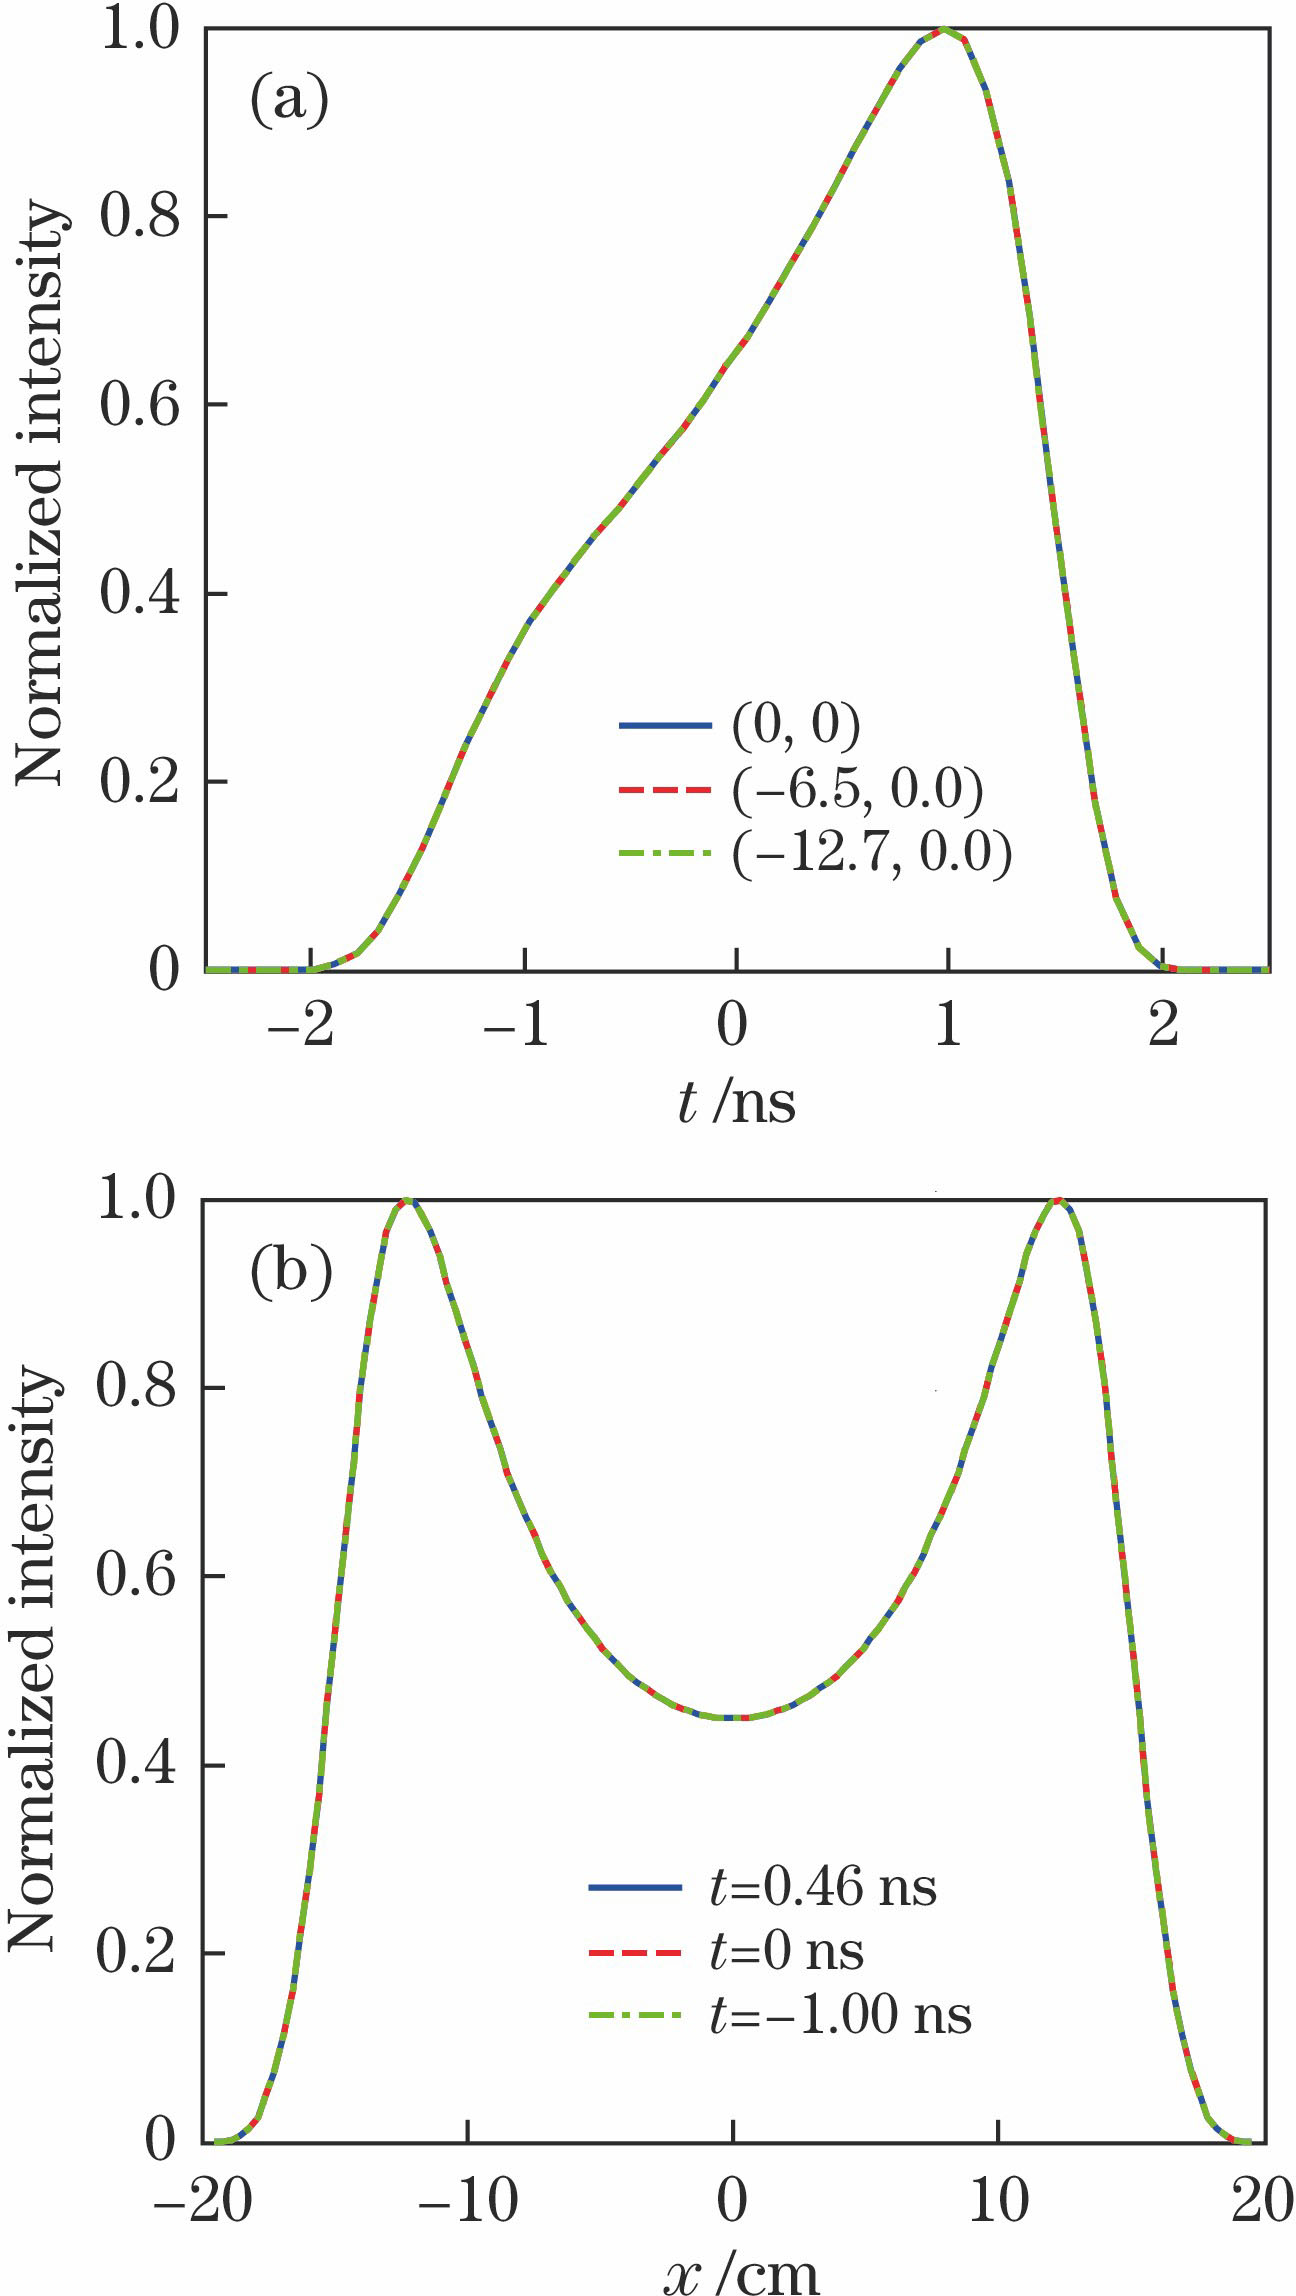 Spatial and temporal distributions of normalized intensity of input pulse (method one). (a) Time waveforms at different coordinate points; (b) one-dimensional spatial distribution at different time